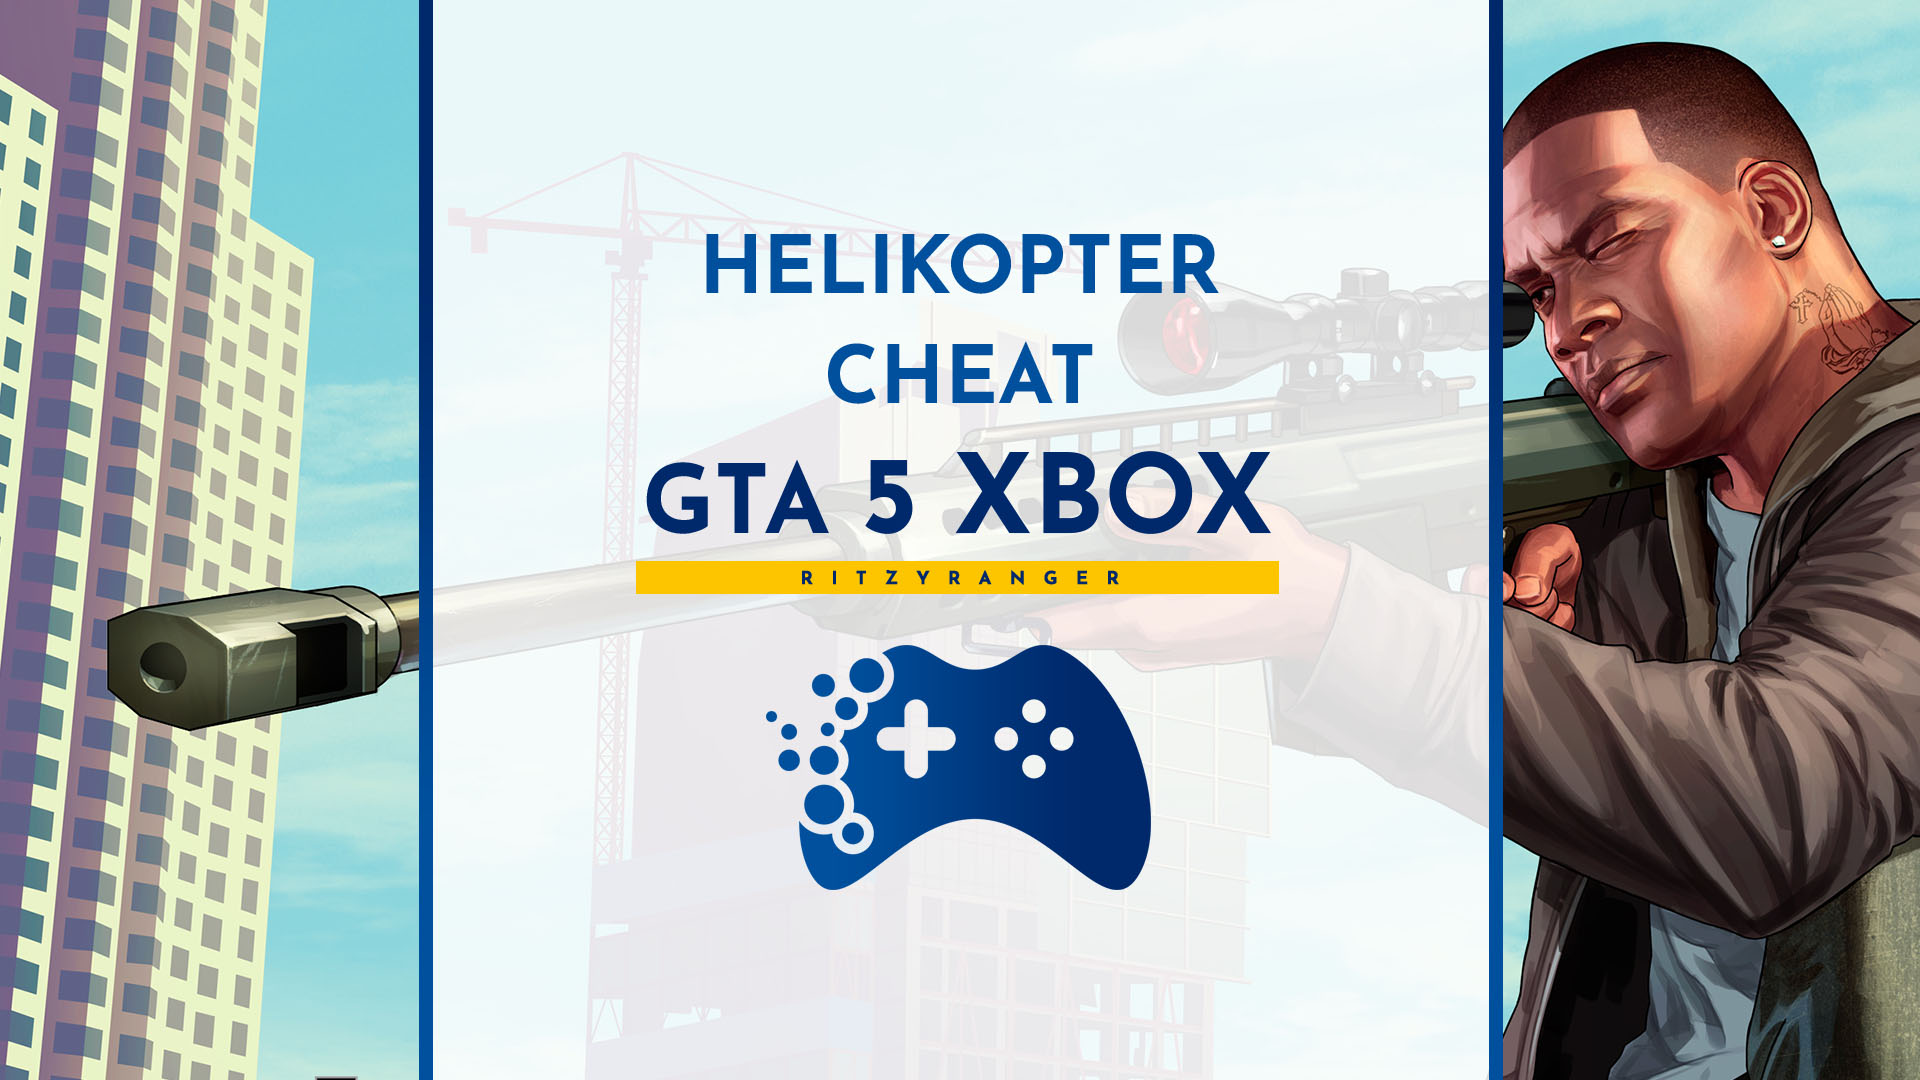 gta 5 helicopter cheat xbox